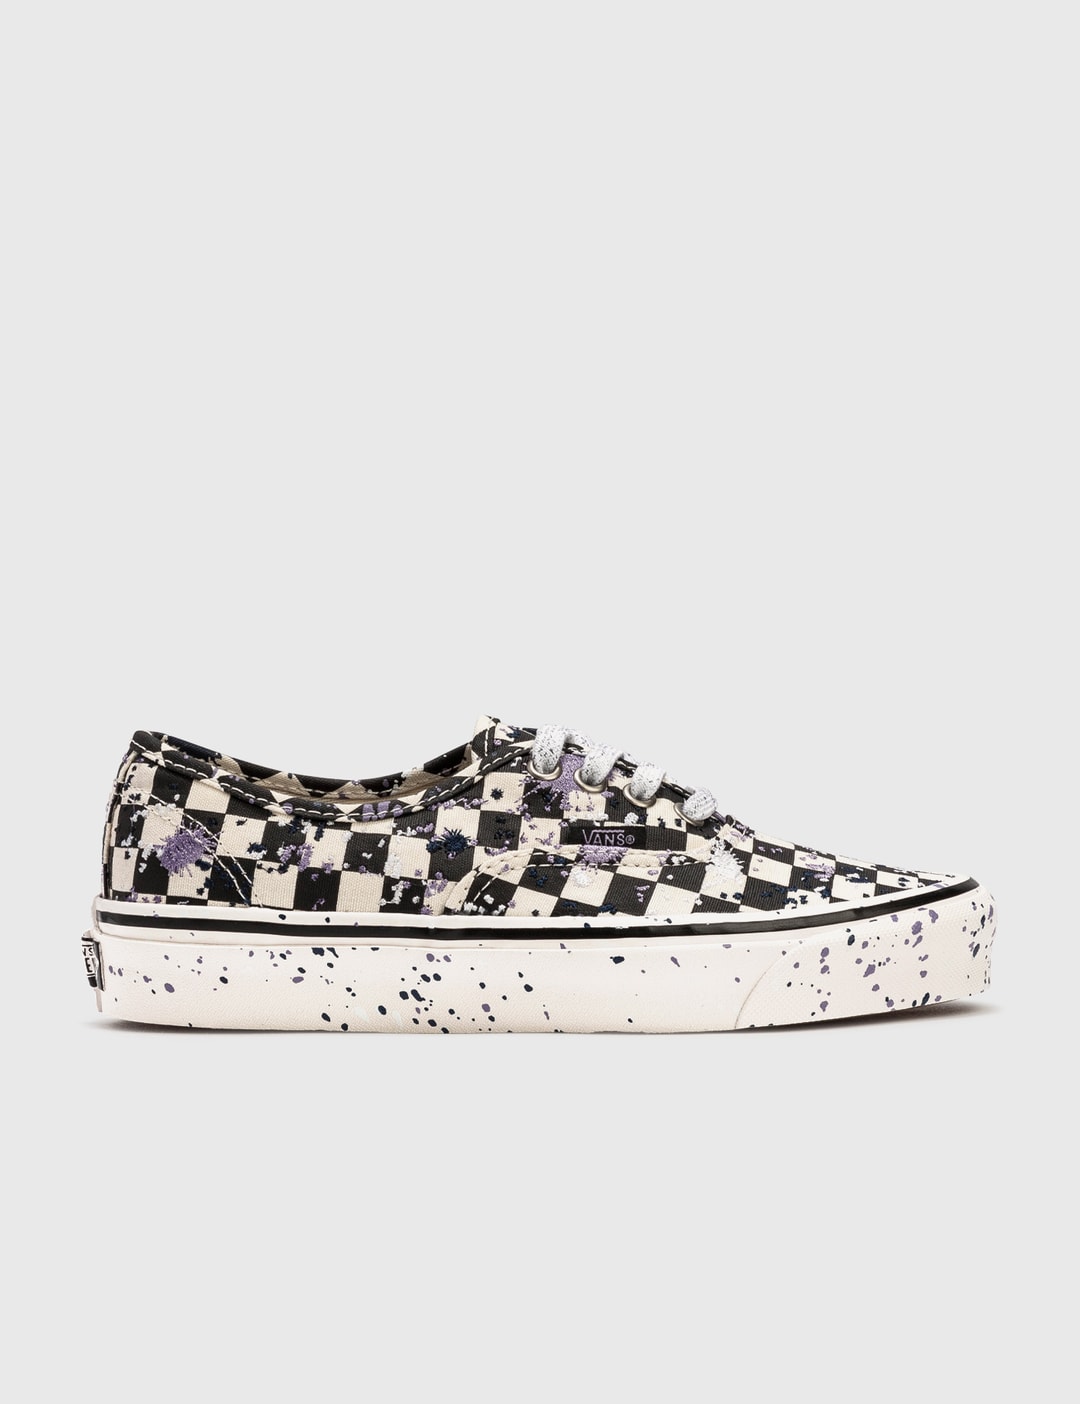 Vans - Authentic 44 DX | HBX - Globally Curated Fashion and Lifestyle ...